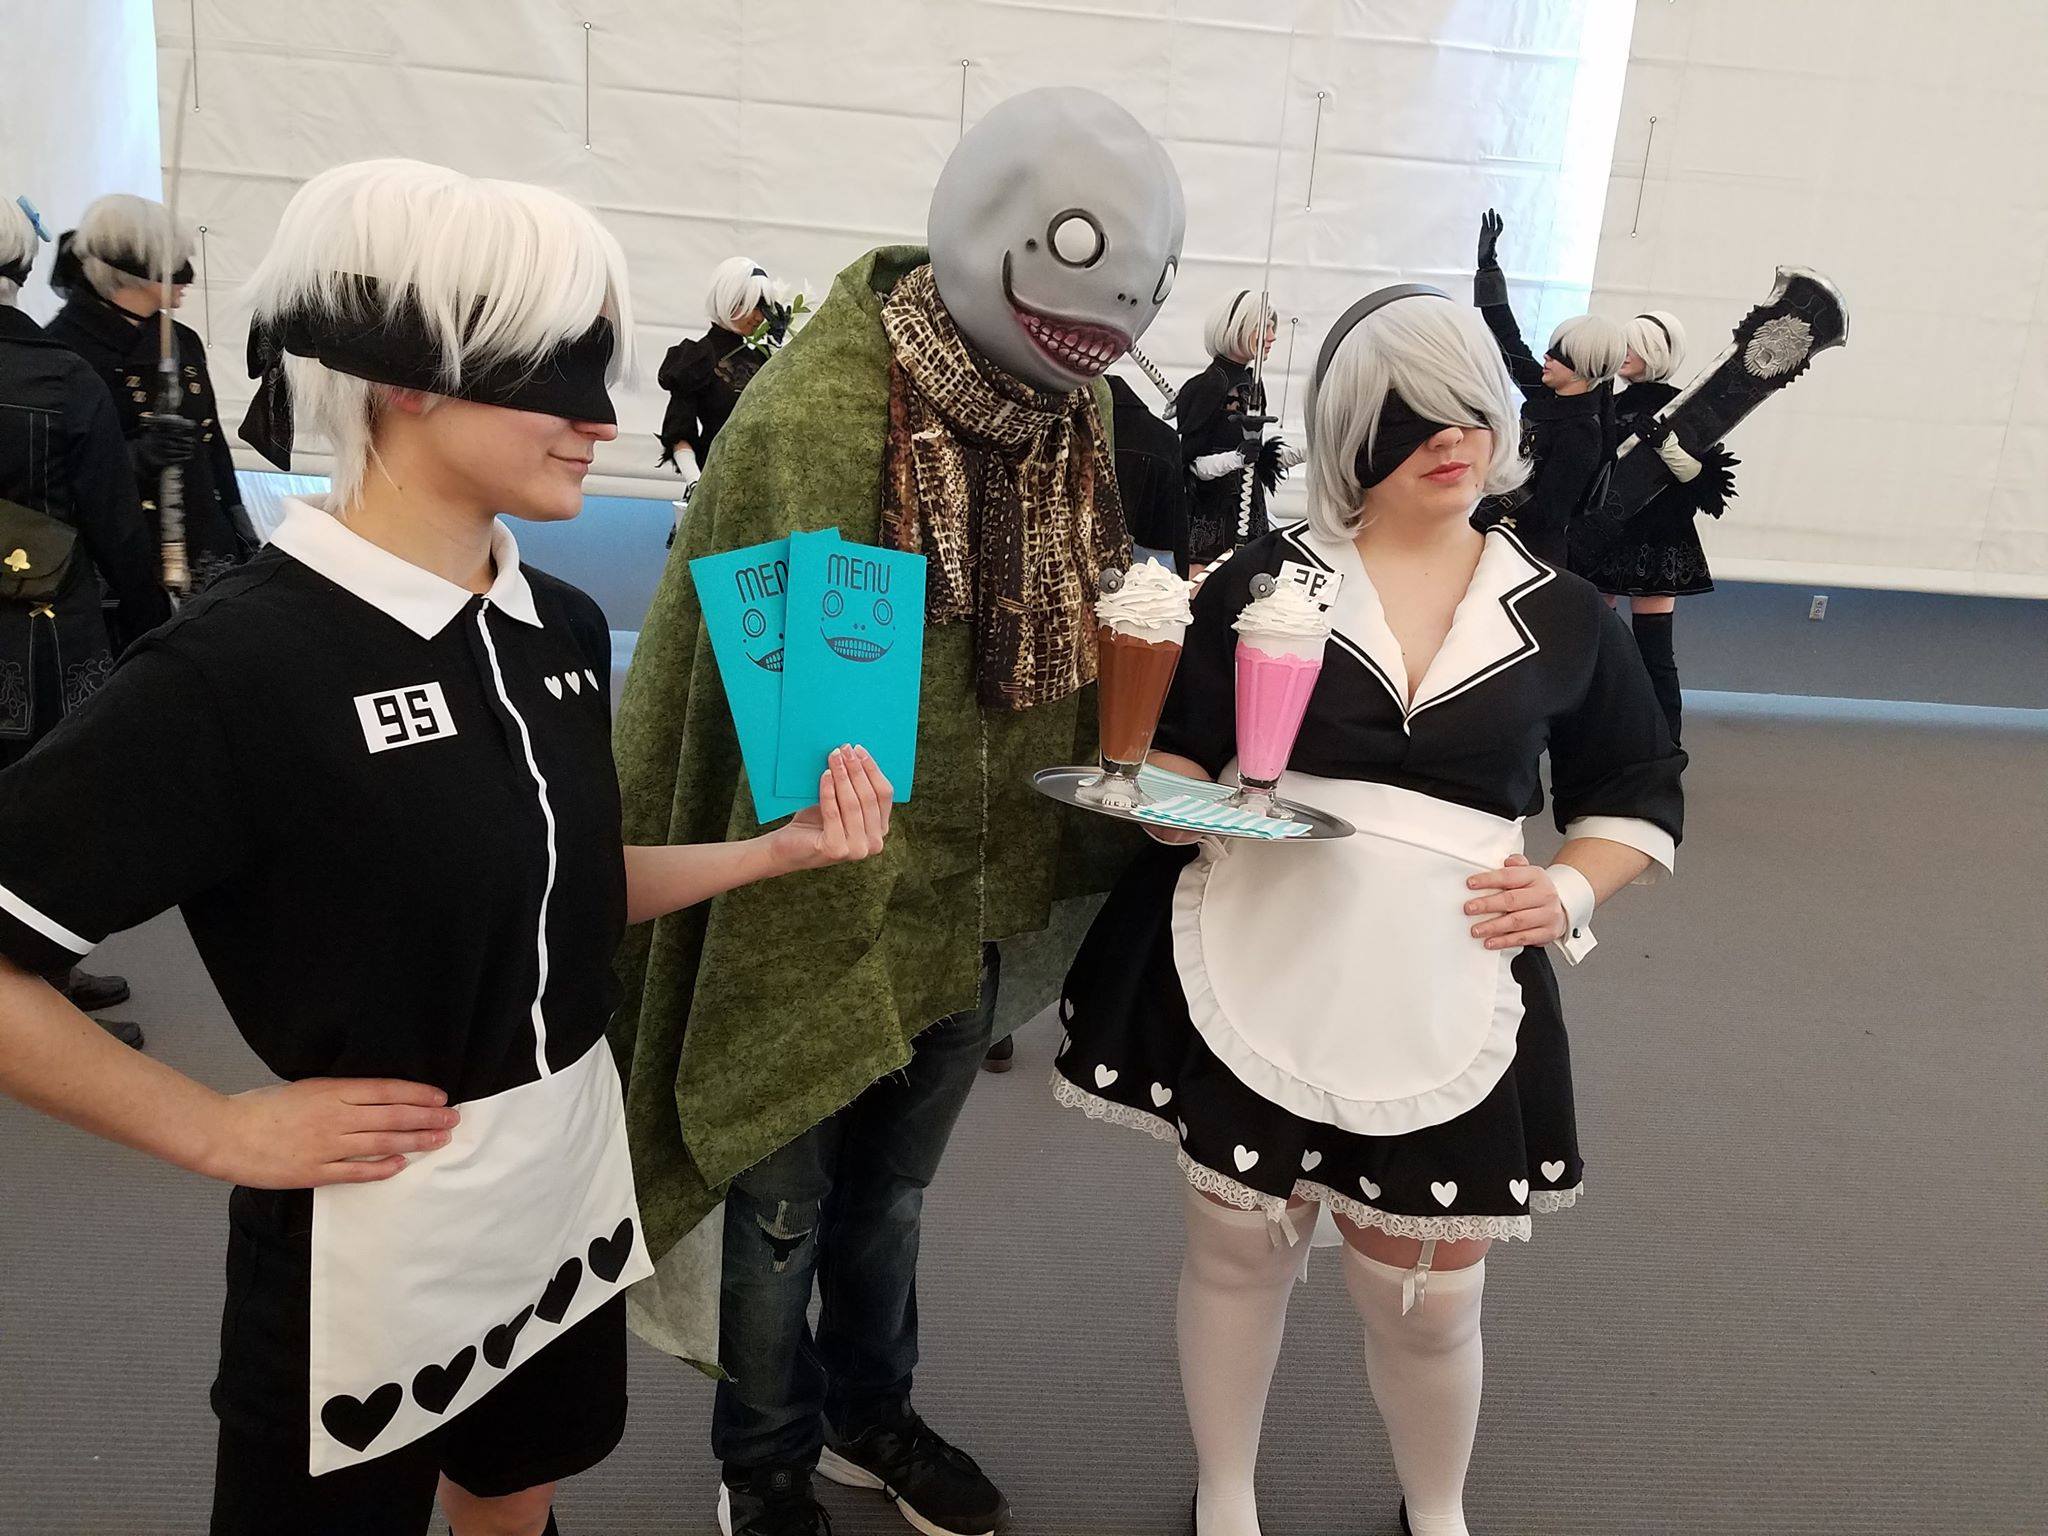 Three people cosplaying 2B, 9S, and Emil pose for a picture at an Anime Convention